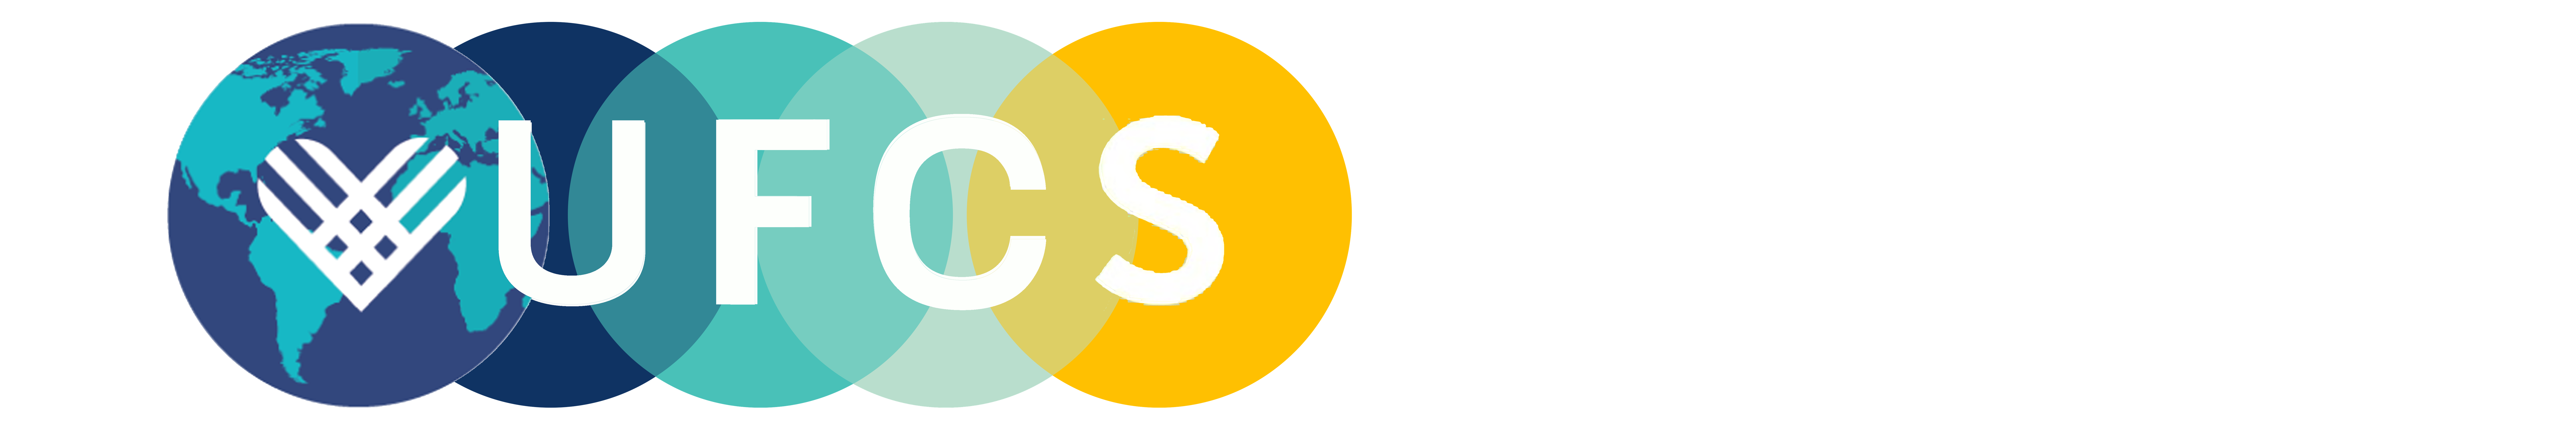 GIVING TUESDAY UFCS LOGO png